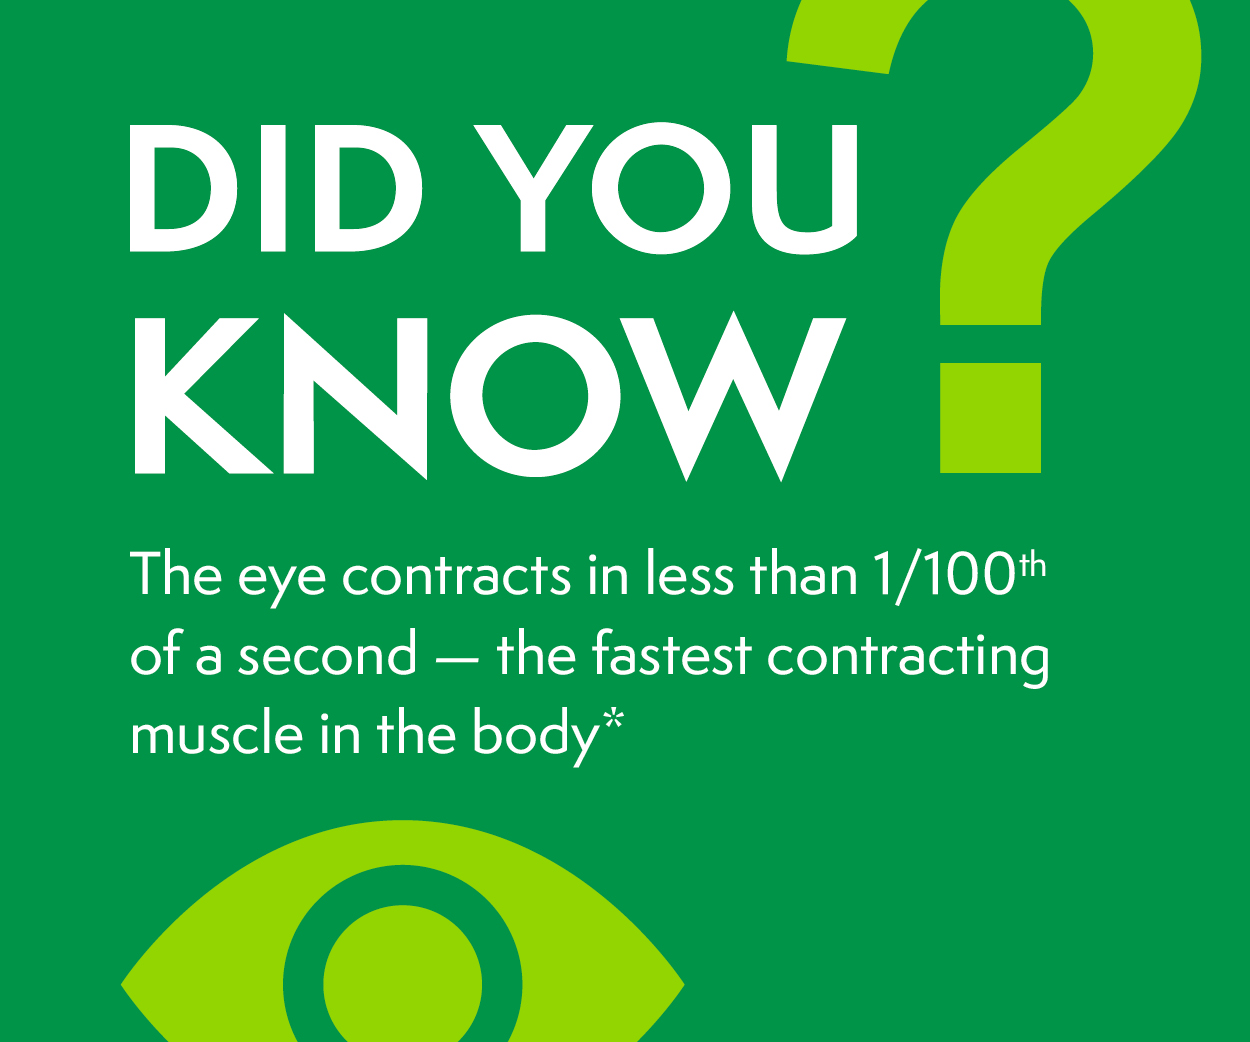 Did you know the eye contracts in less than 1/100th of a second - the fastest contracting muscle in 